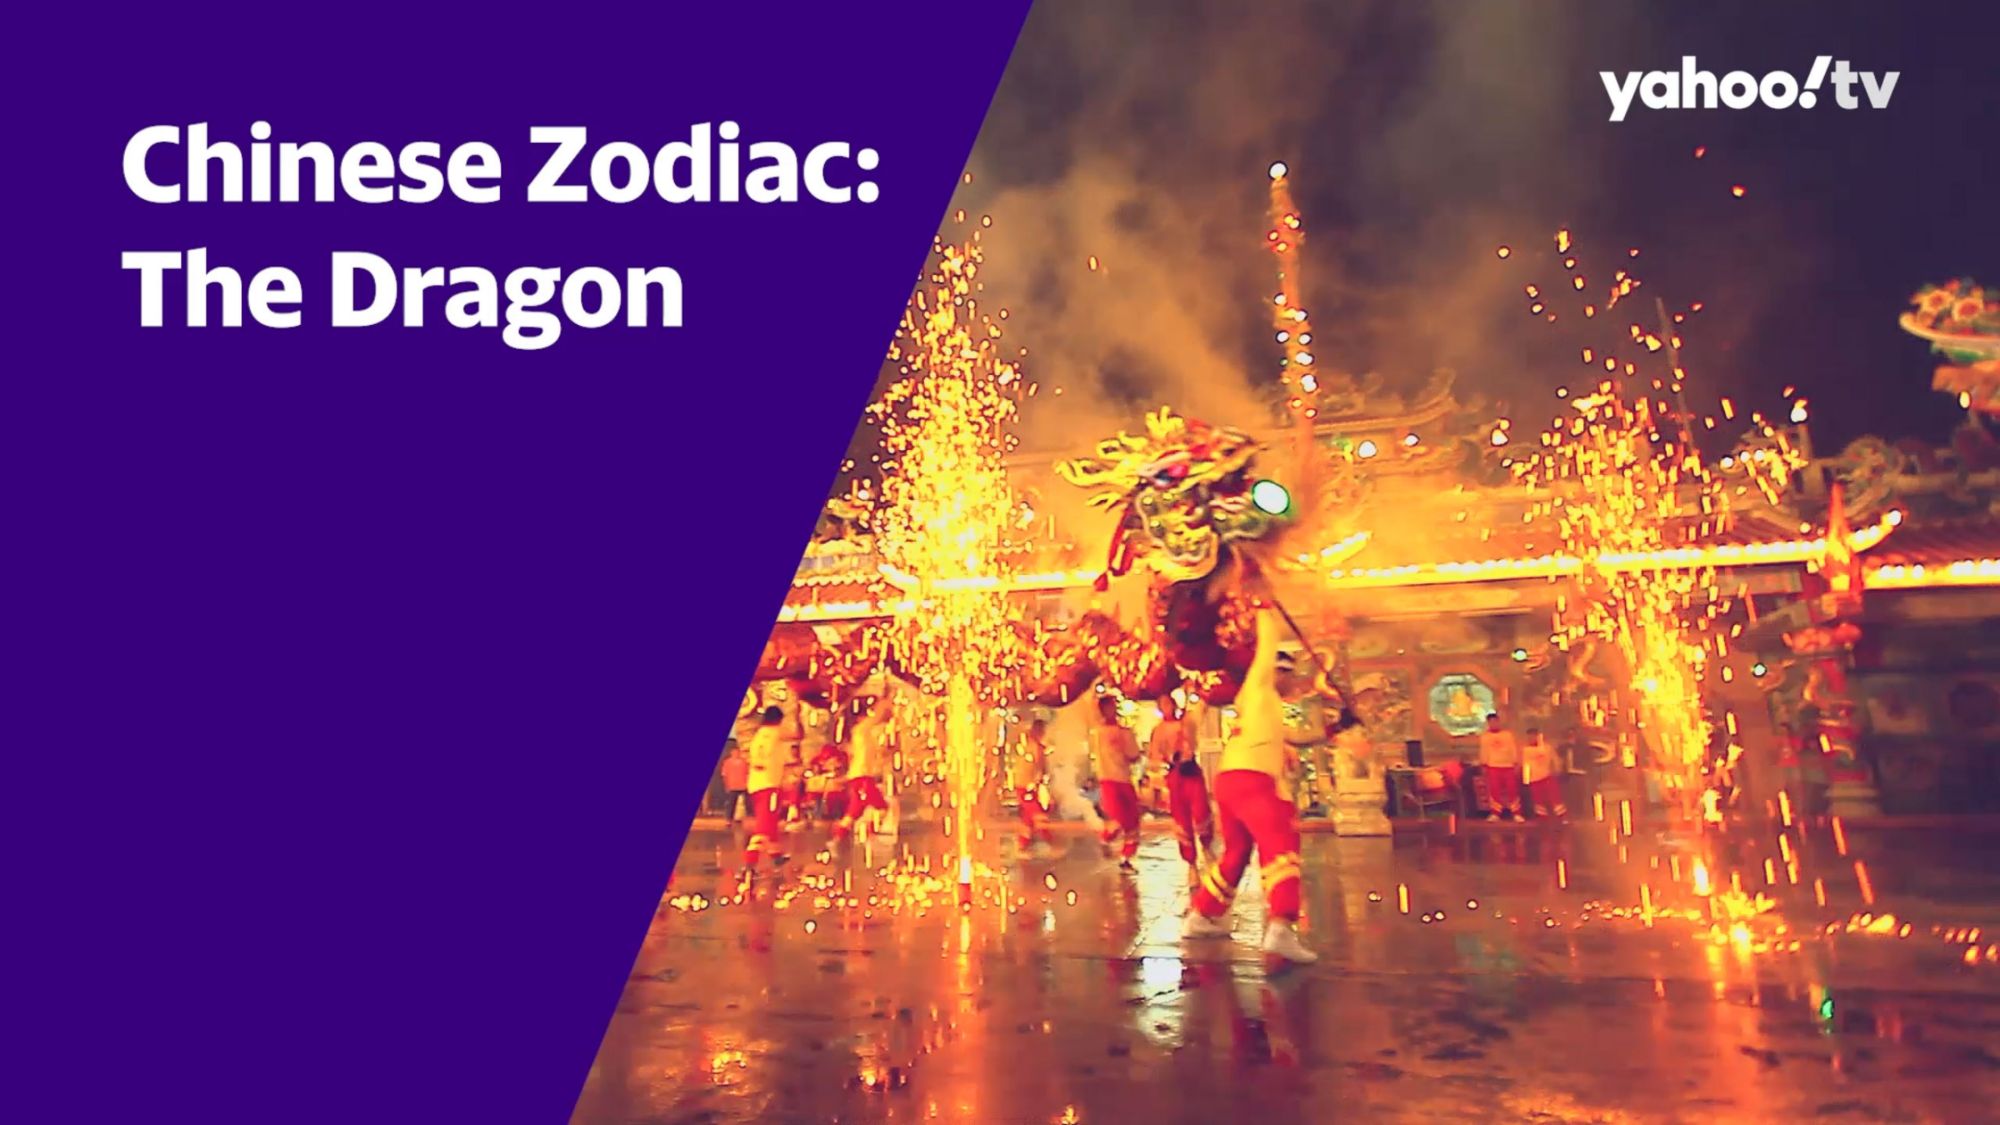 About the Chinese Zodiac: The Dragon